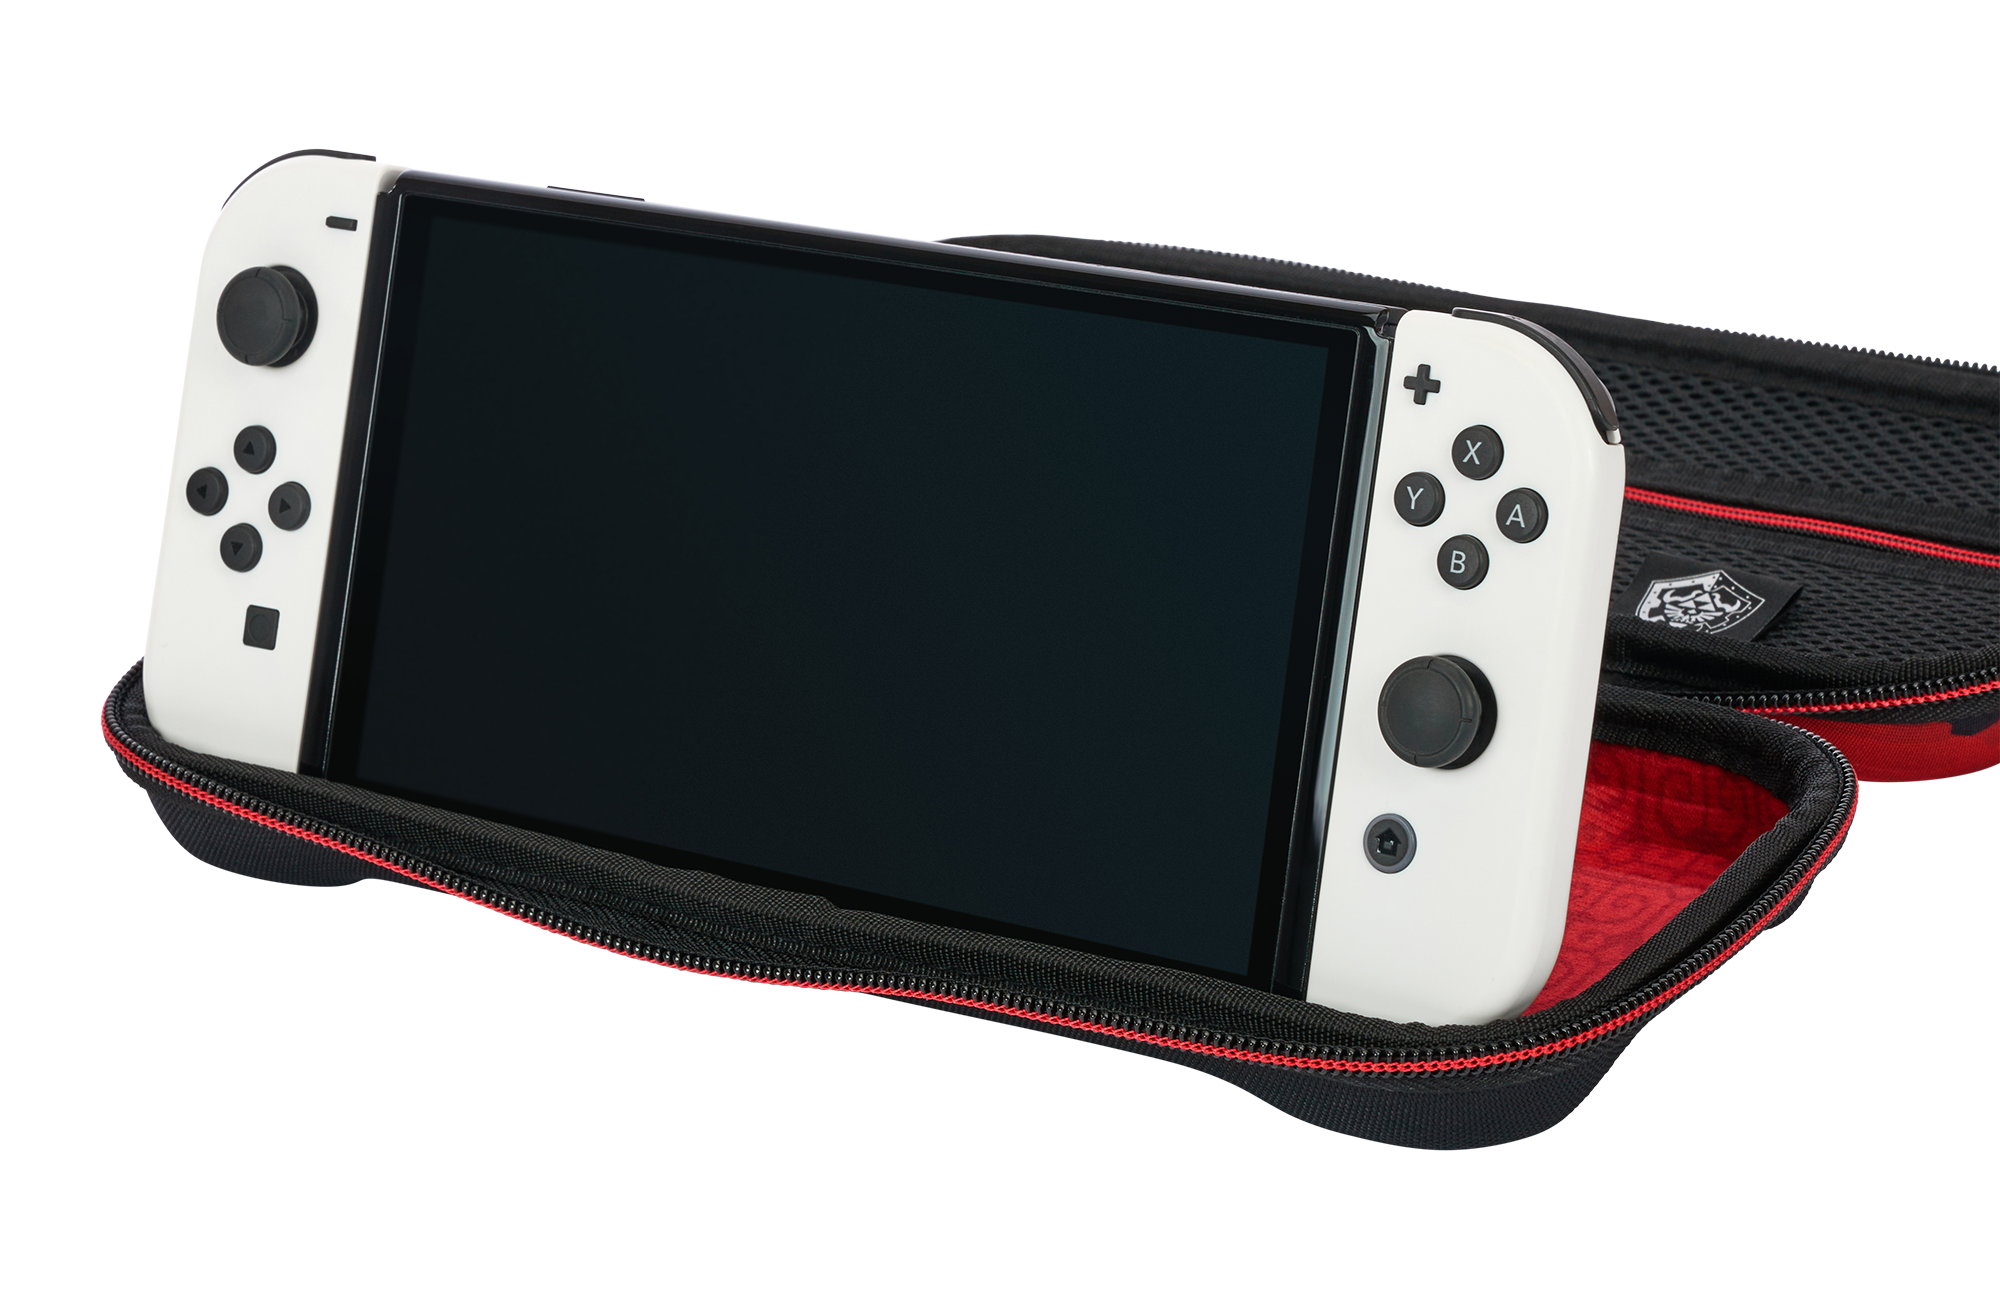 PowerA Protection Case for Nintendo Switch and Nintendo Switch Lite Link vs Ganondorf